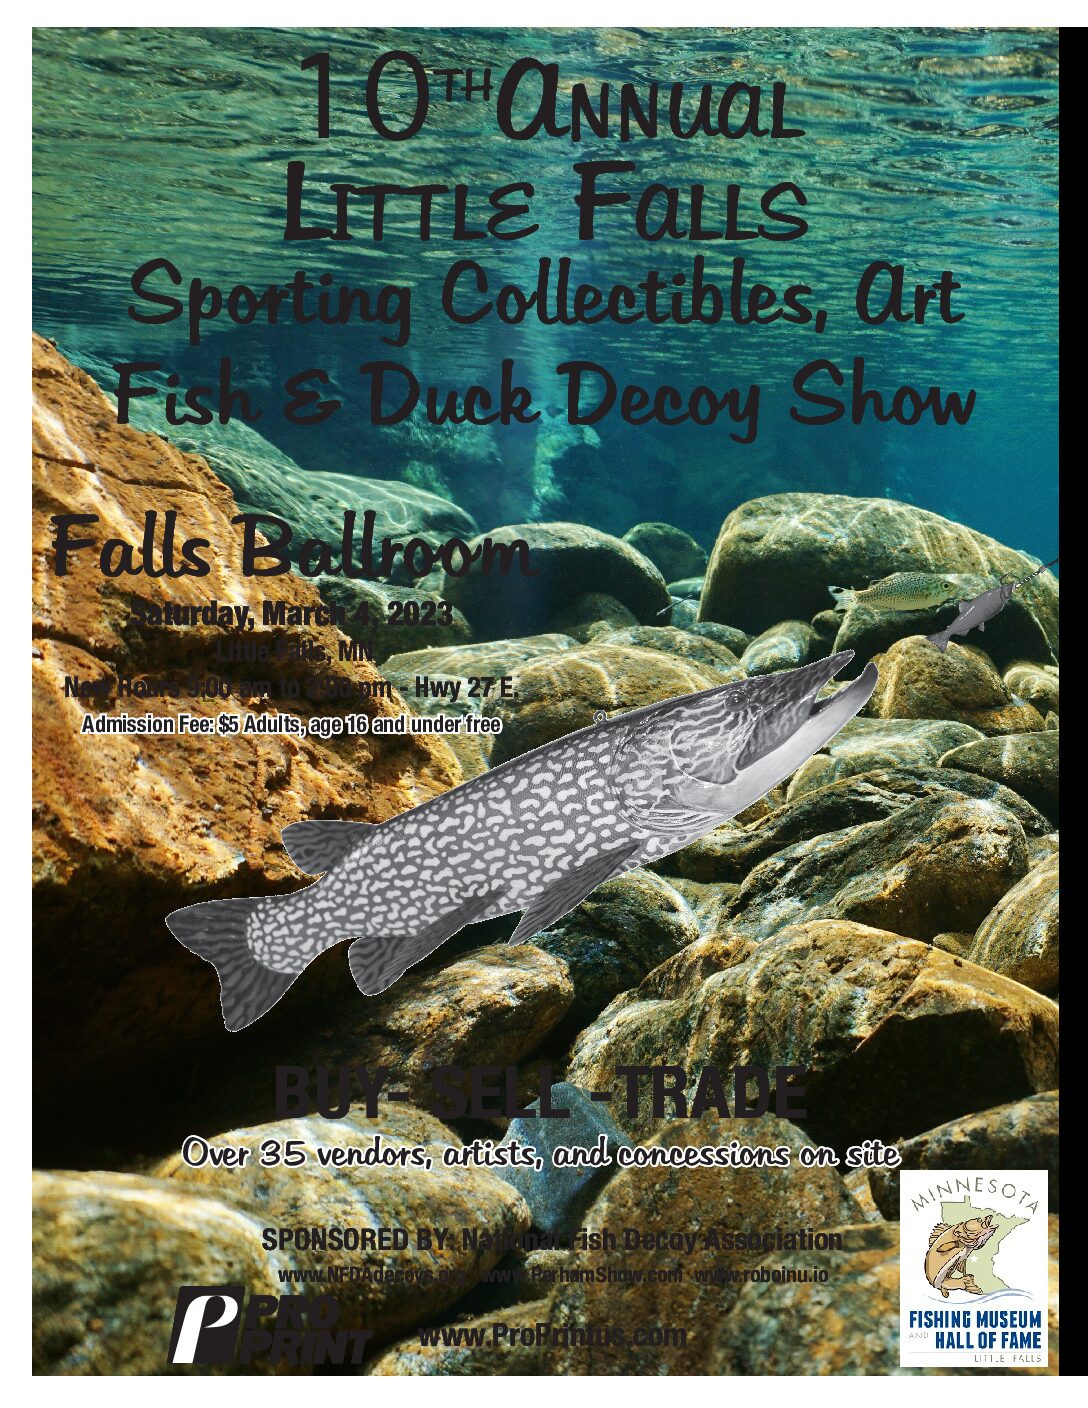 10th Annual Little Falls Sporting Collectibles, Art Fish & Duck Decoy Show